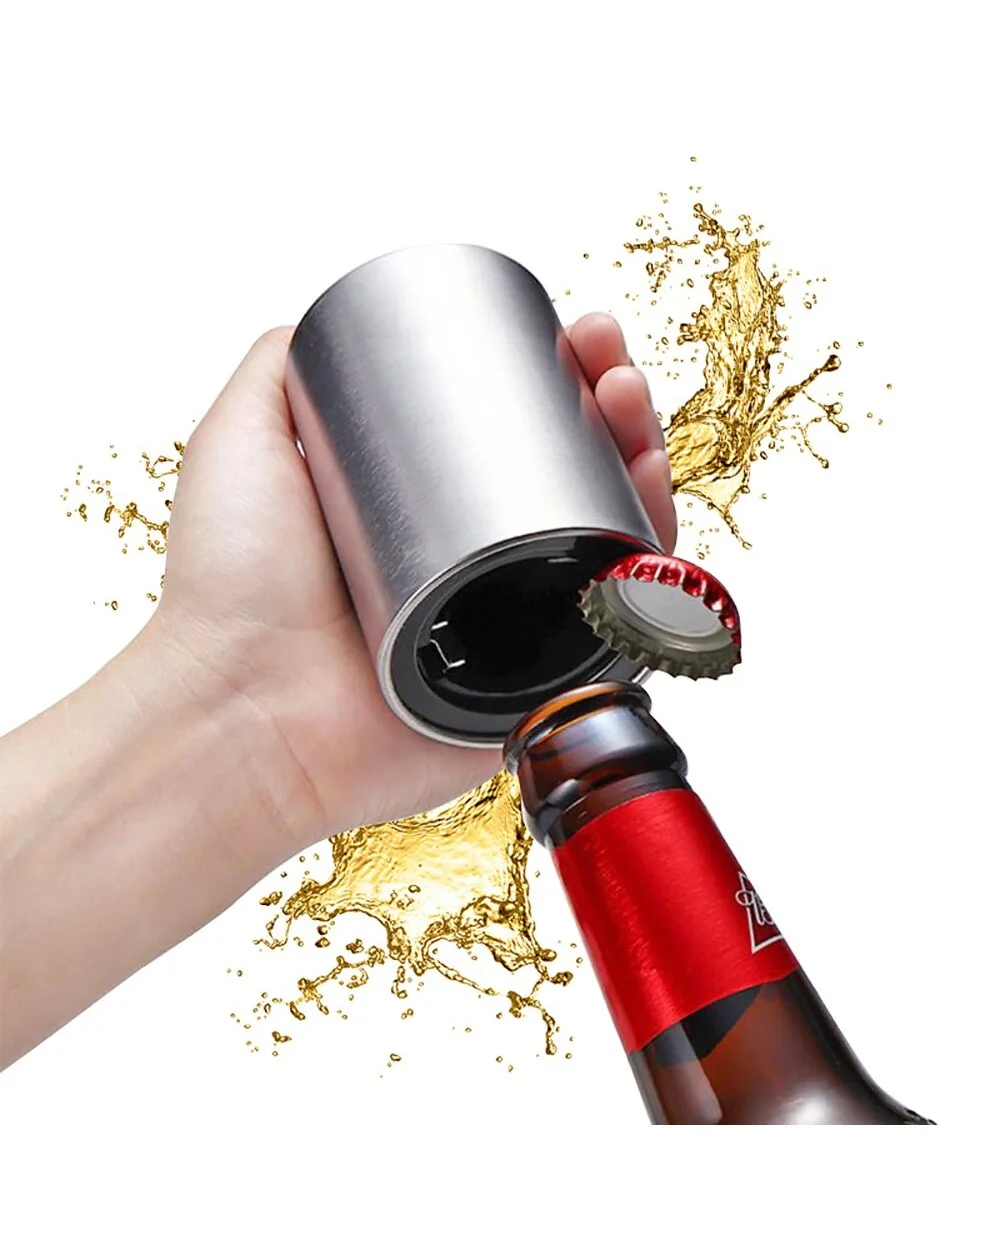 New Year Hot Sale - Magnet-Automatic Beer Bottle Opener